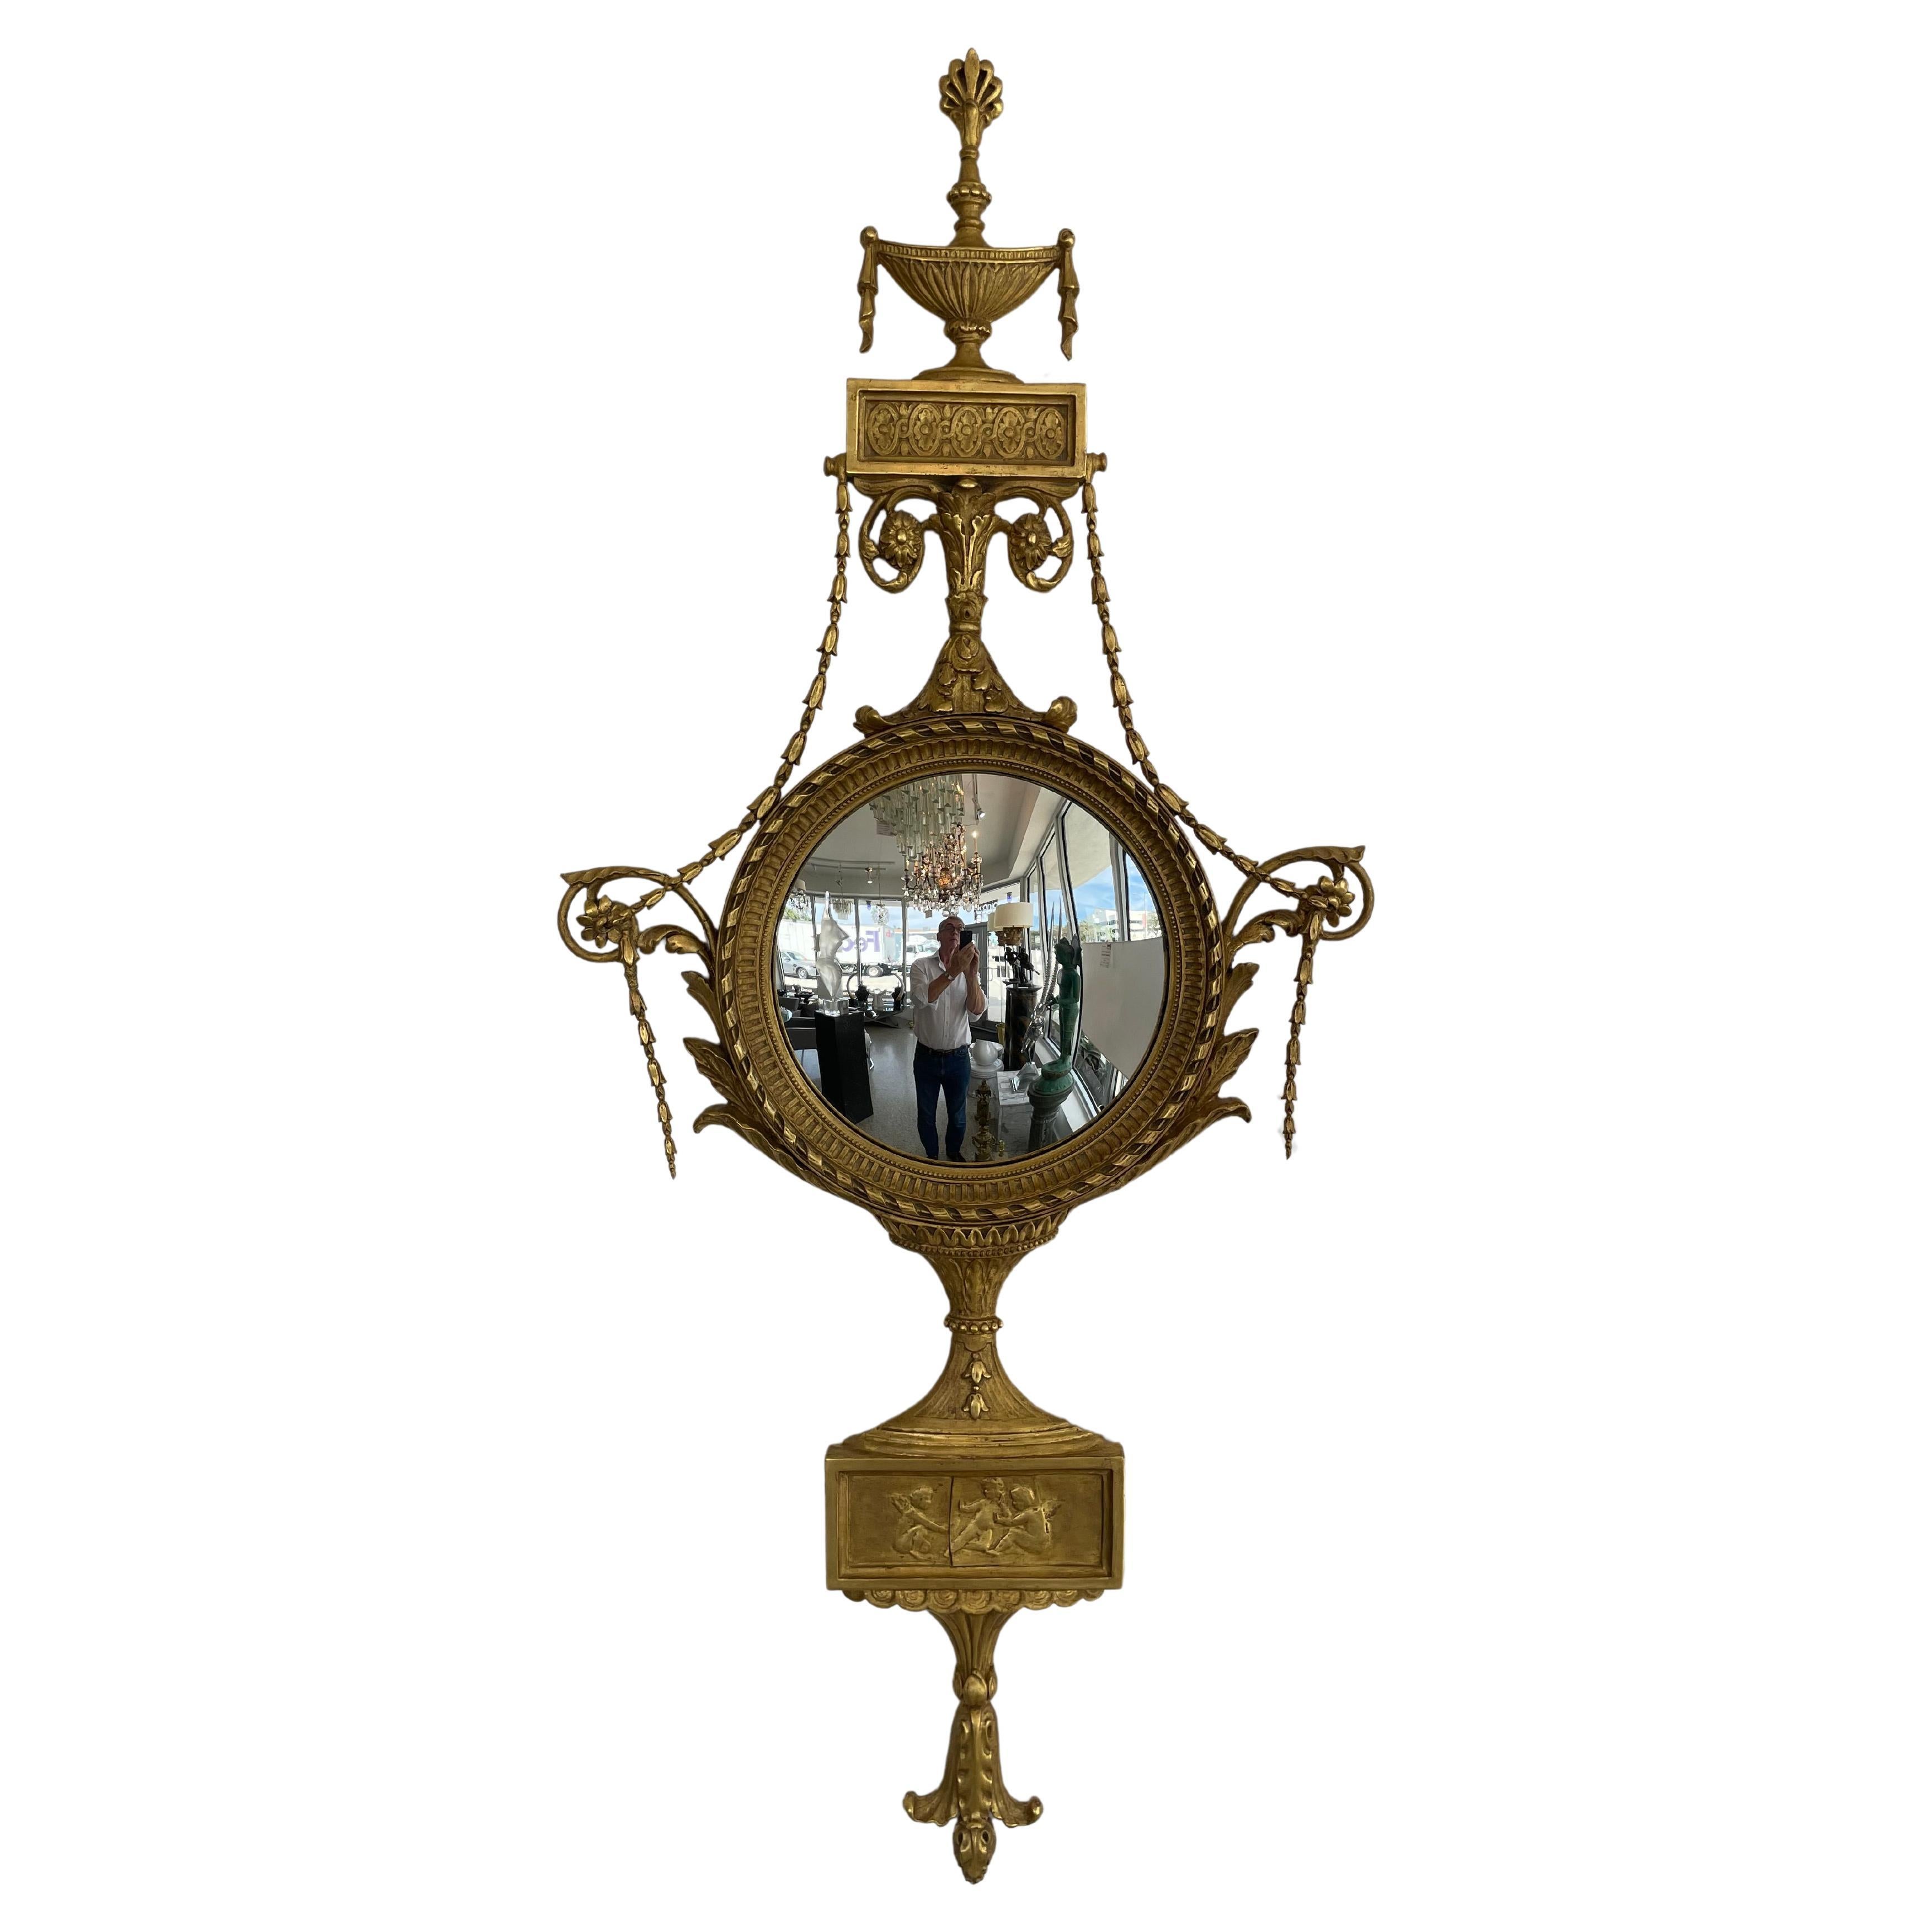 This stylish Adams style convex wall mirror dates to the later part of the 19th century, and it will make a subltle and elegant statement with its form and use of materials.  

Note: Retains its original retaliers label.

FYI: A history of the